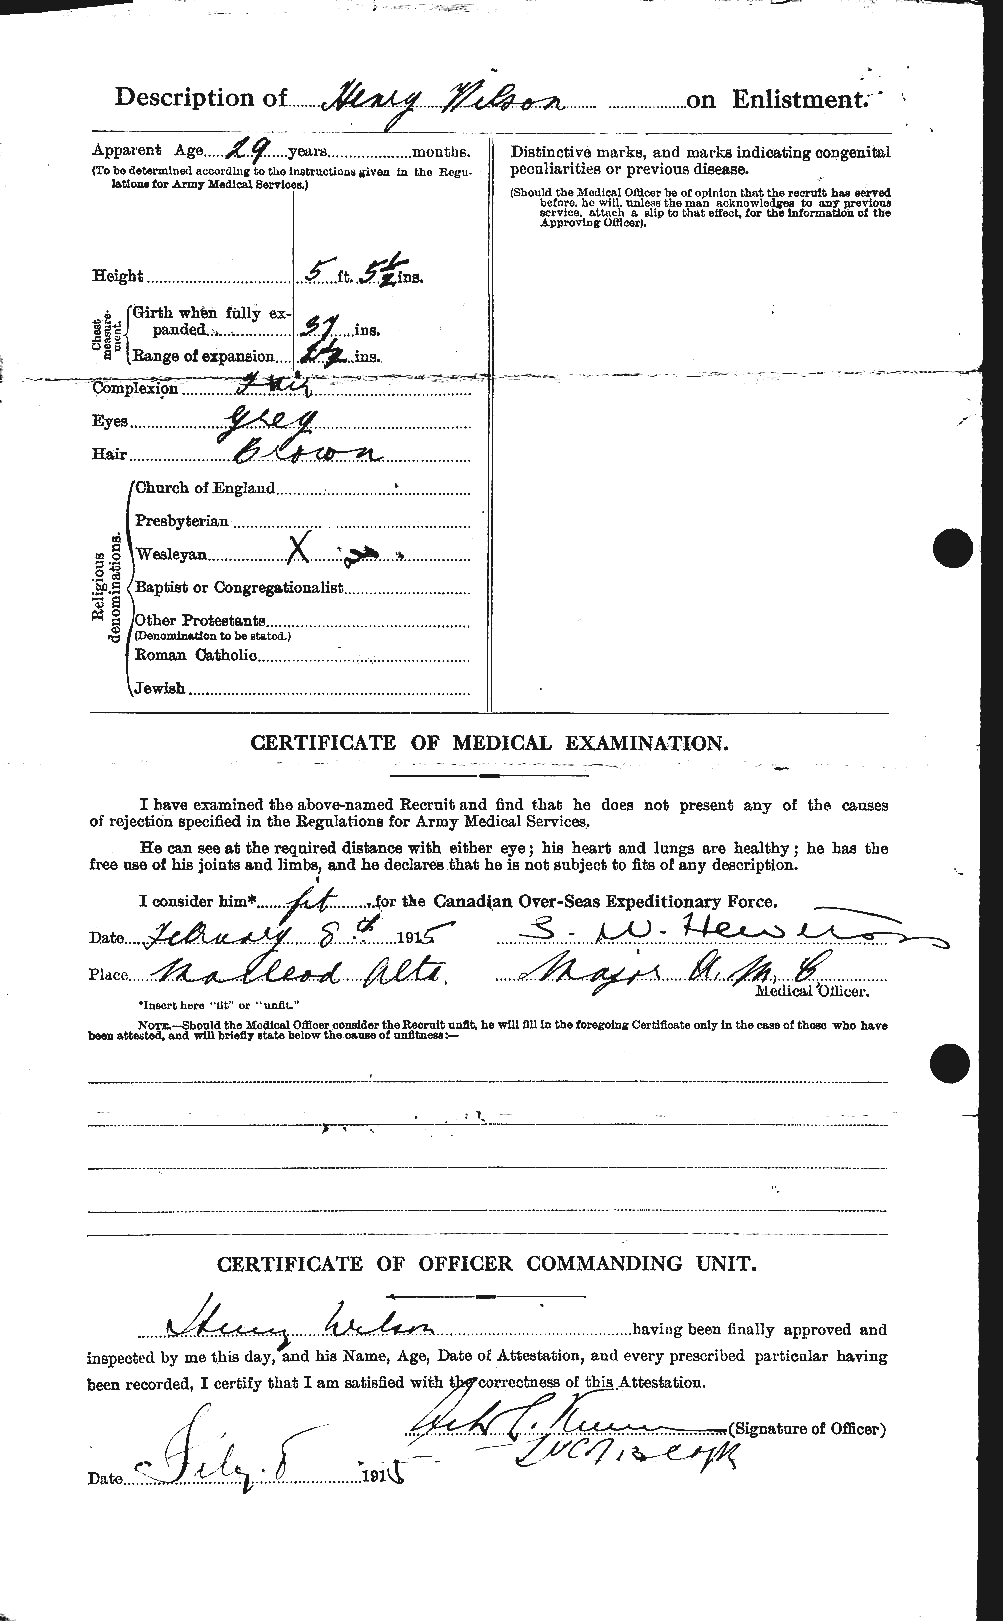 Personnel Records of the First World War - CEF 679499b